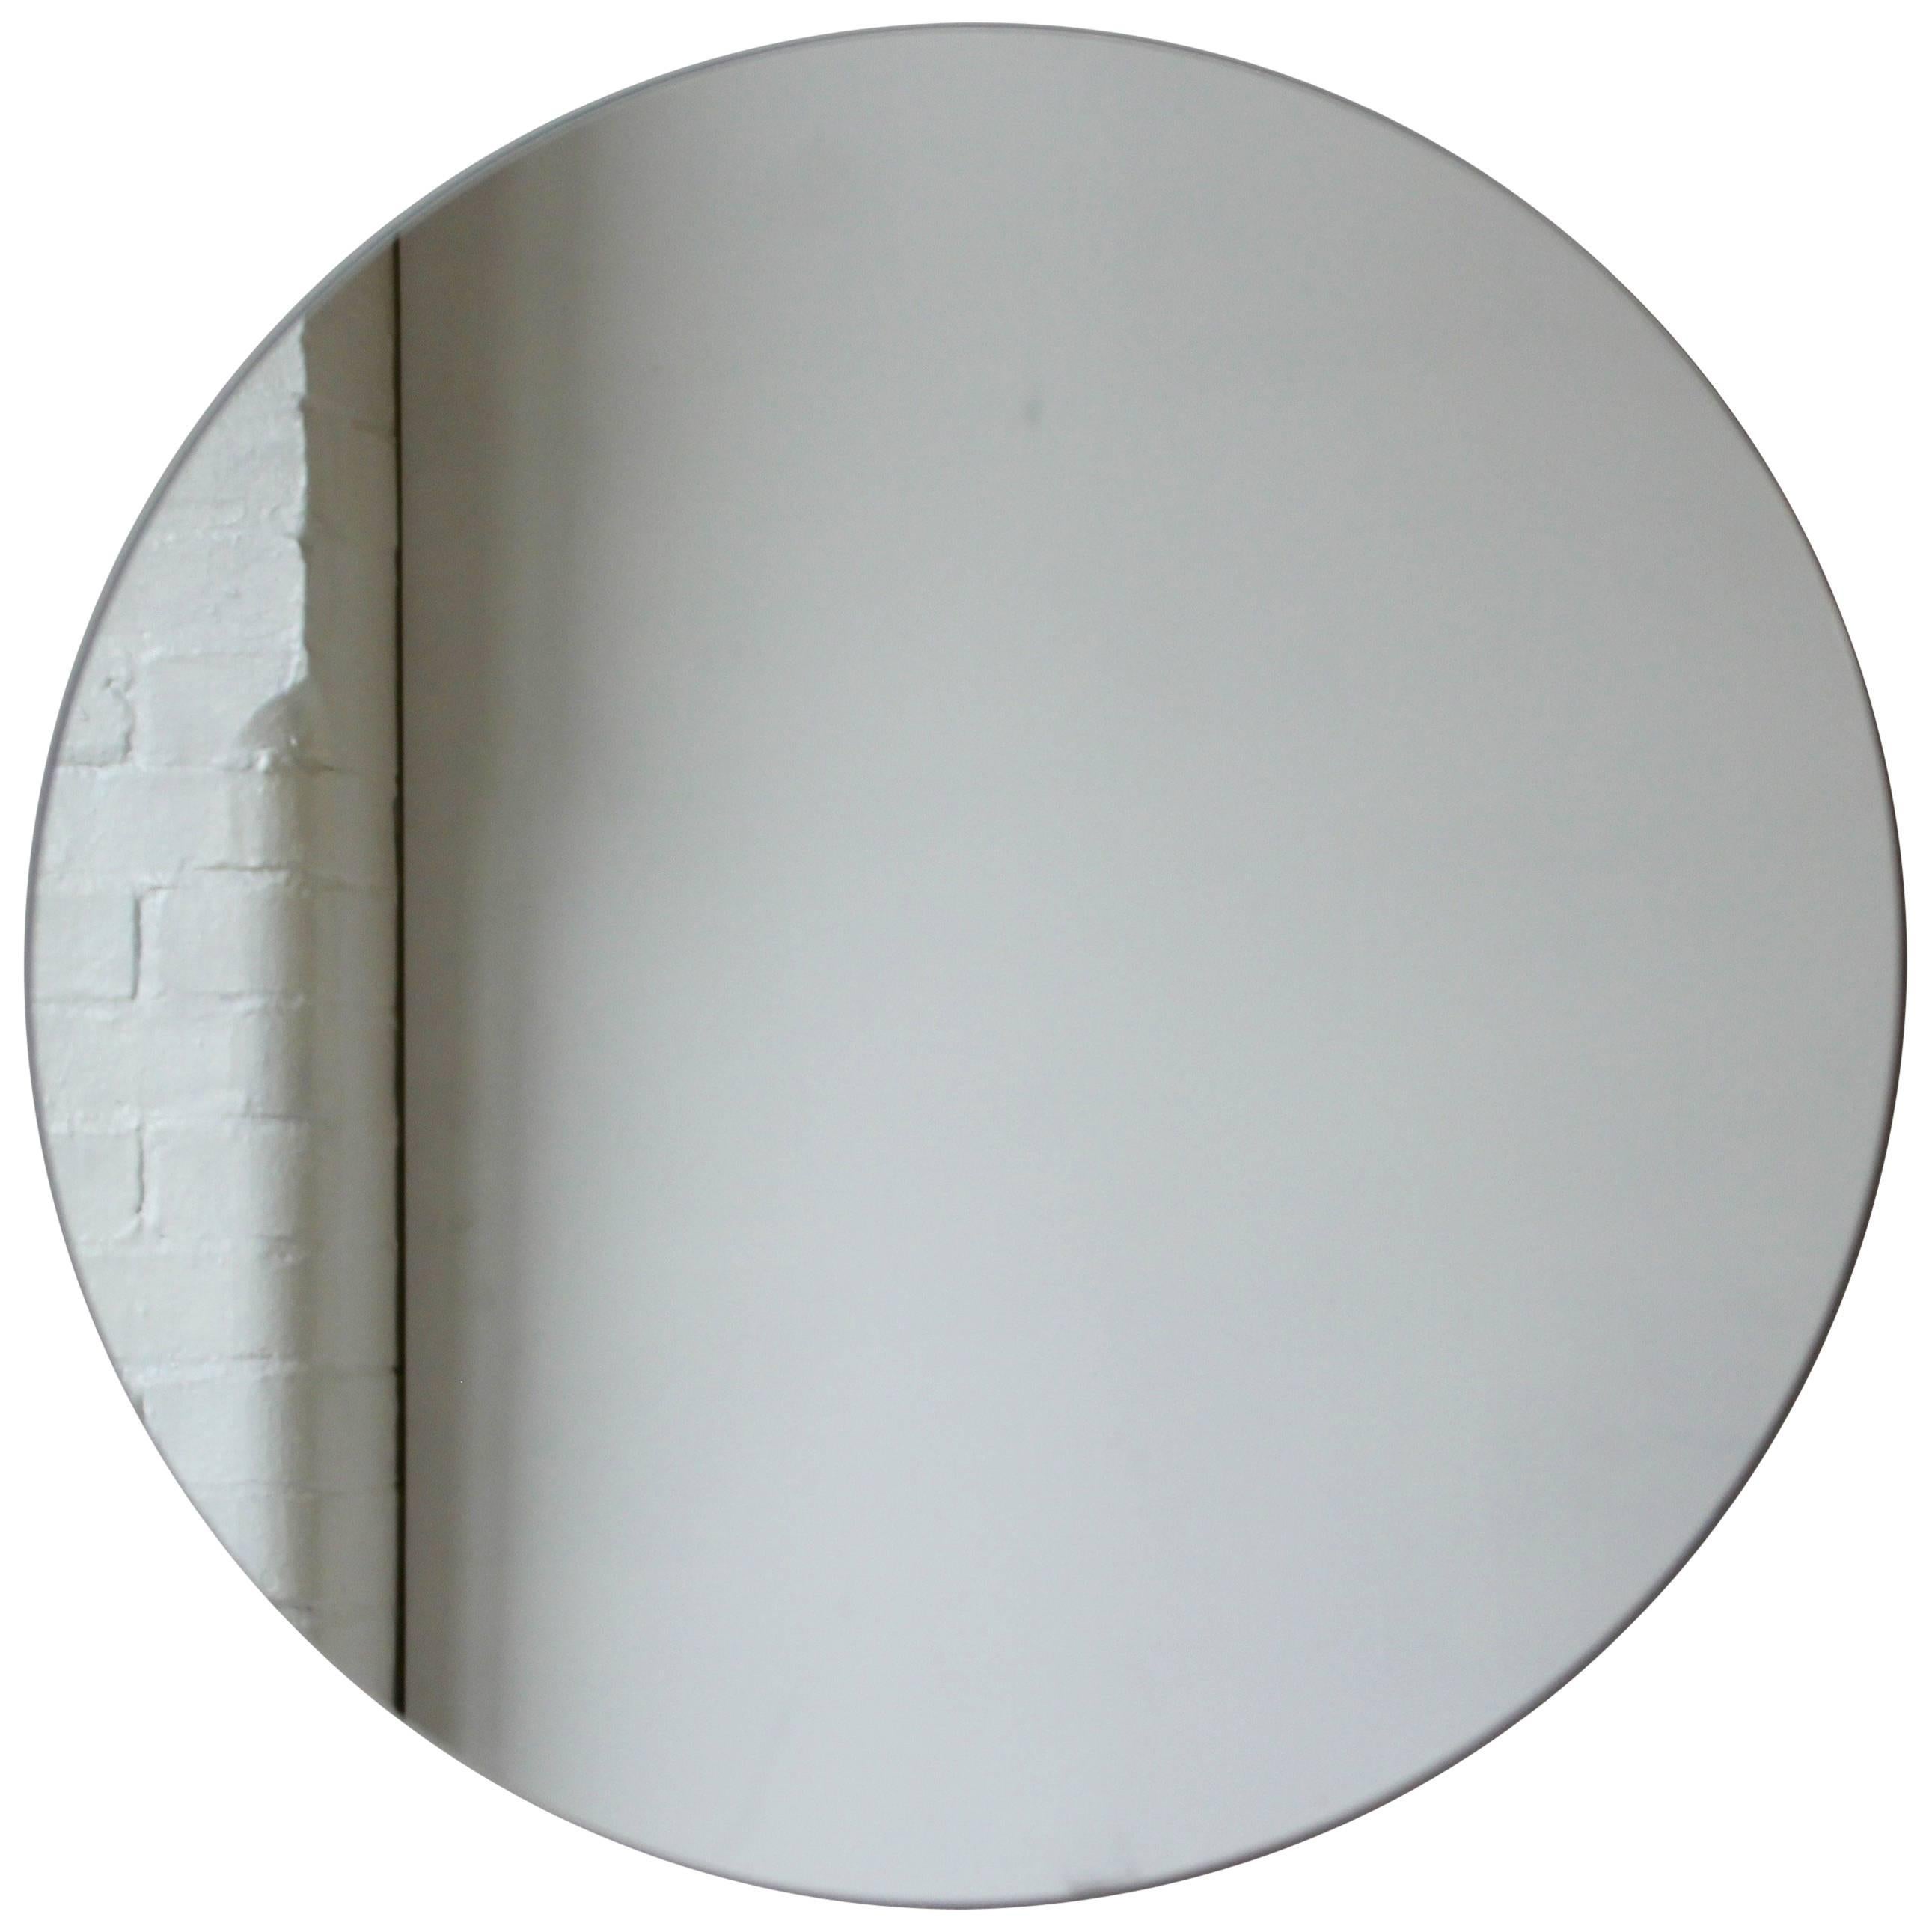 In Stock Orbis Round Minimalist Contemporary Frameless Mirror, Large For Sale